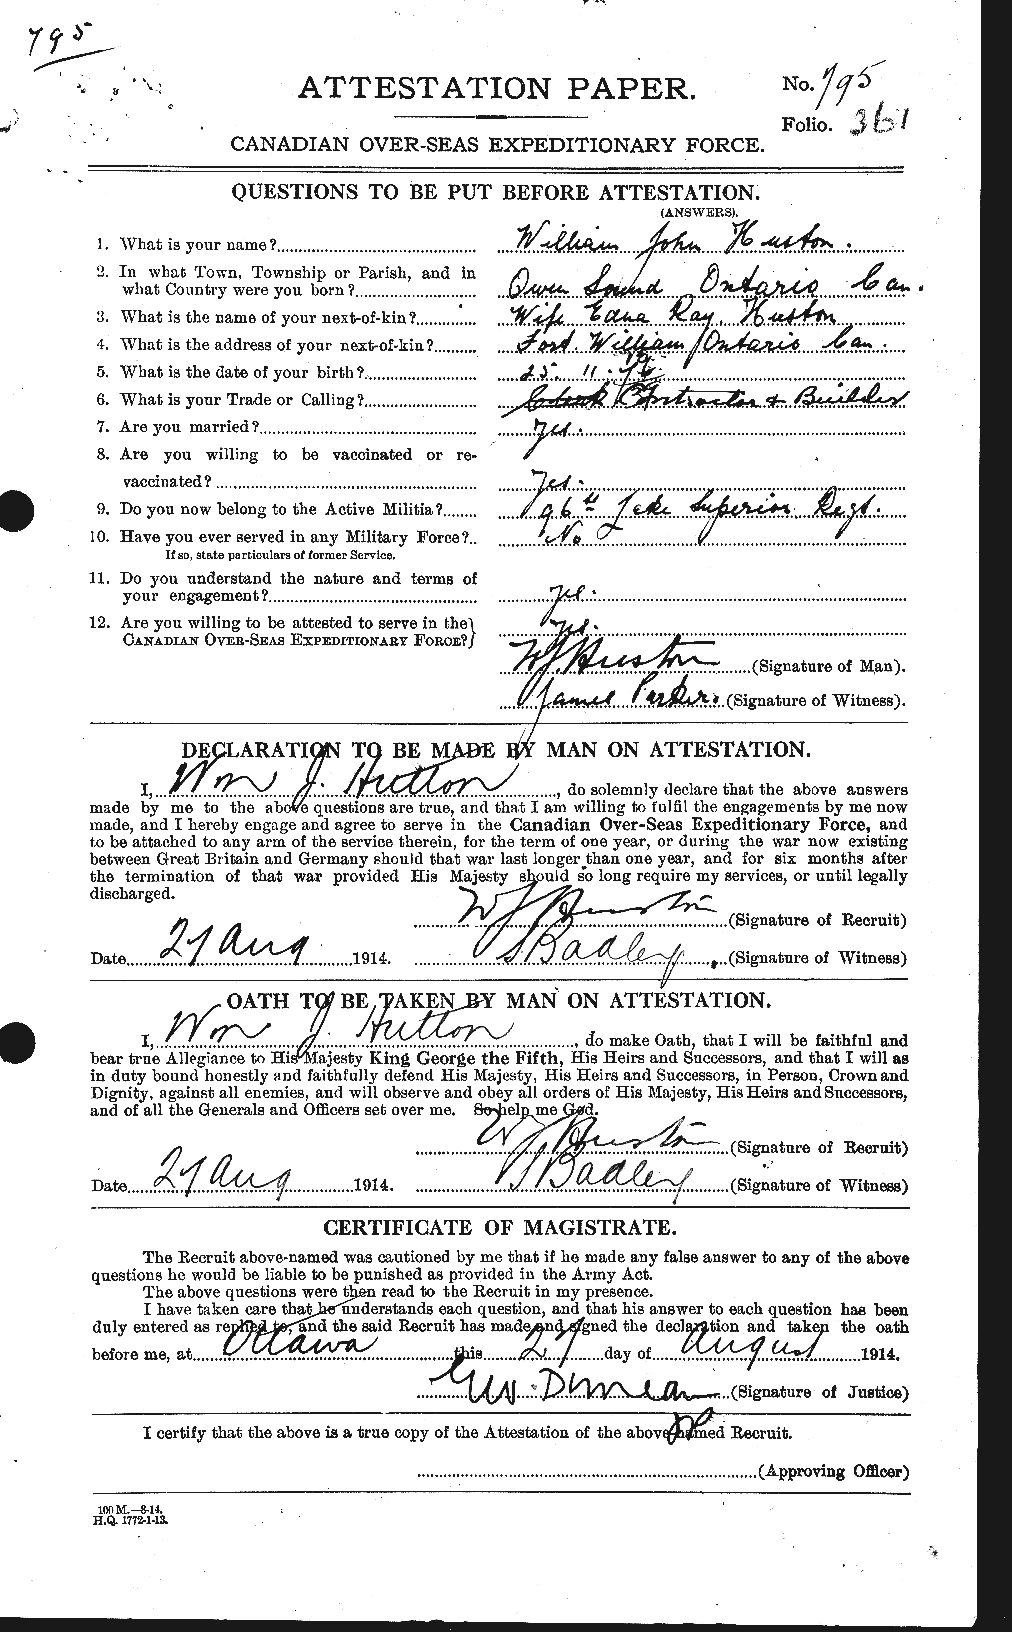 Personnel Records of the First World War - CEF 407916a